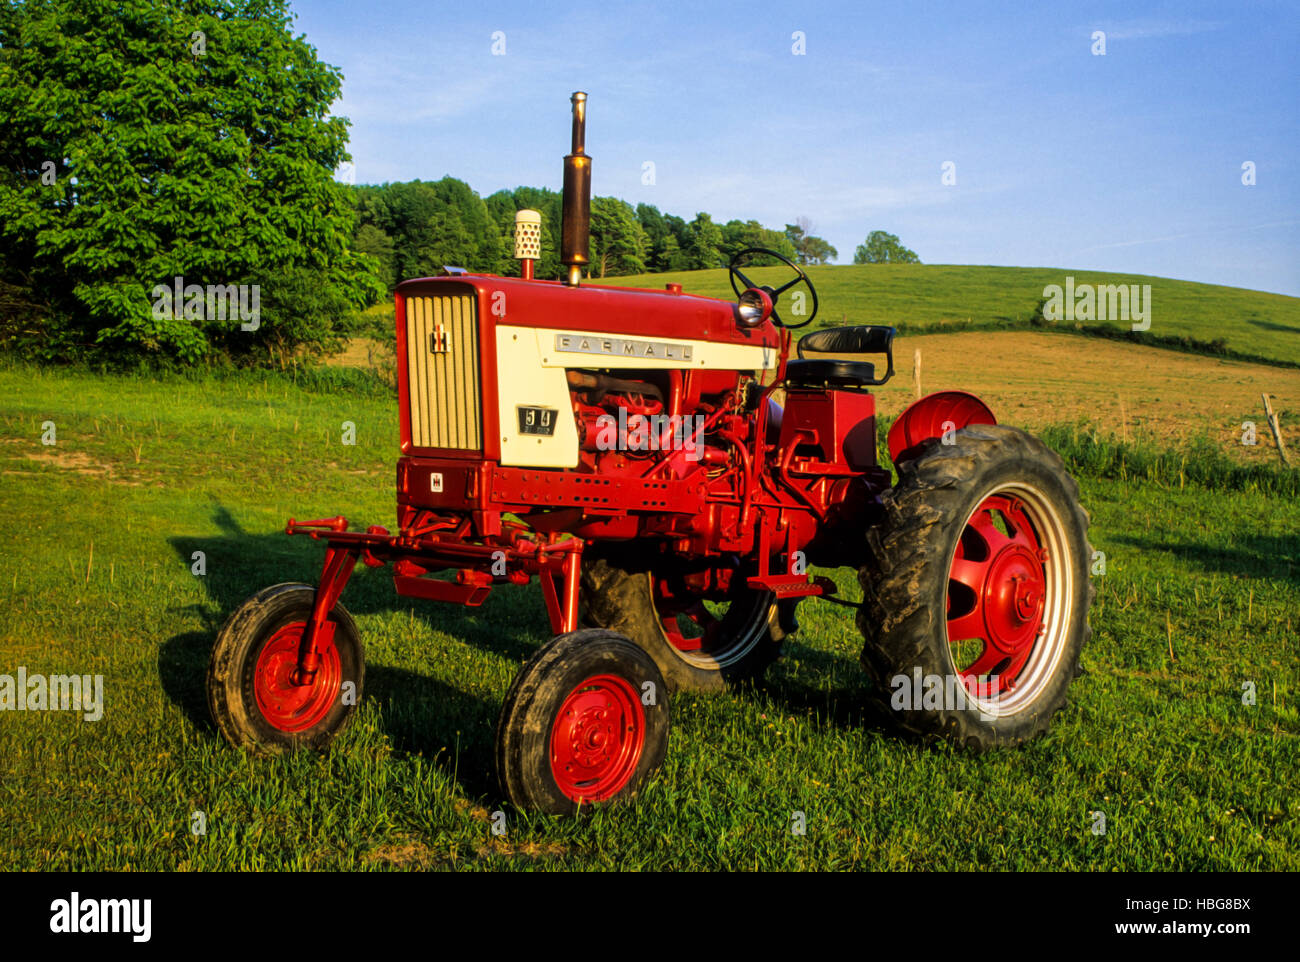 Vintage Farmall High Crop tractor 504, 1967, Cattaraugus county, New York, USA, US, FS 9.42 MB, vintage tractors spring antique images Stock Photo